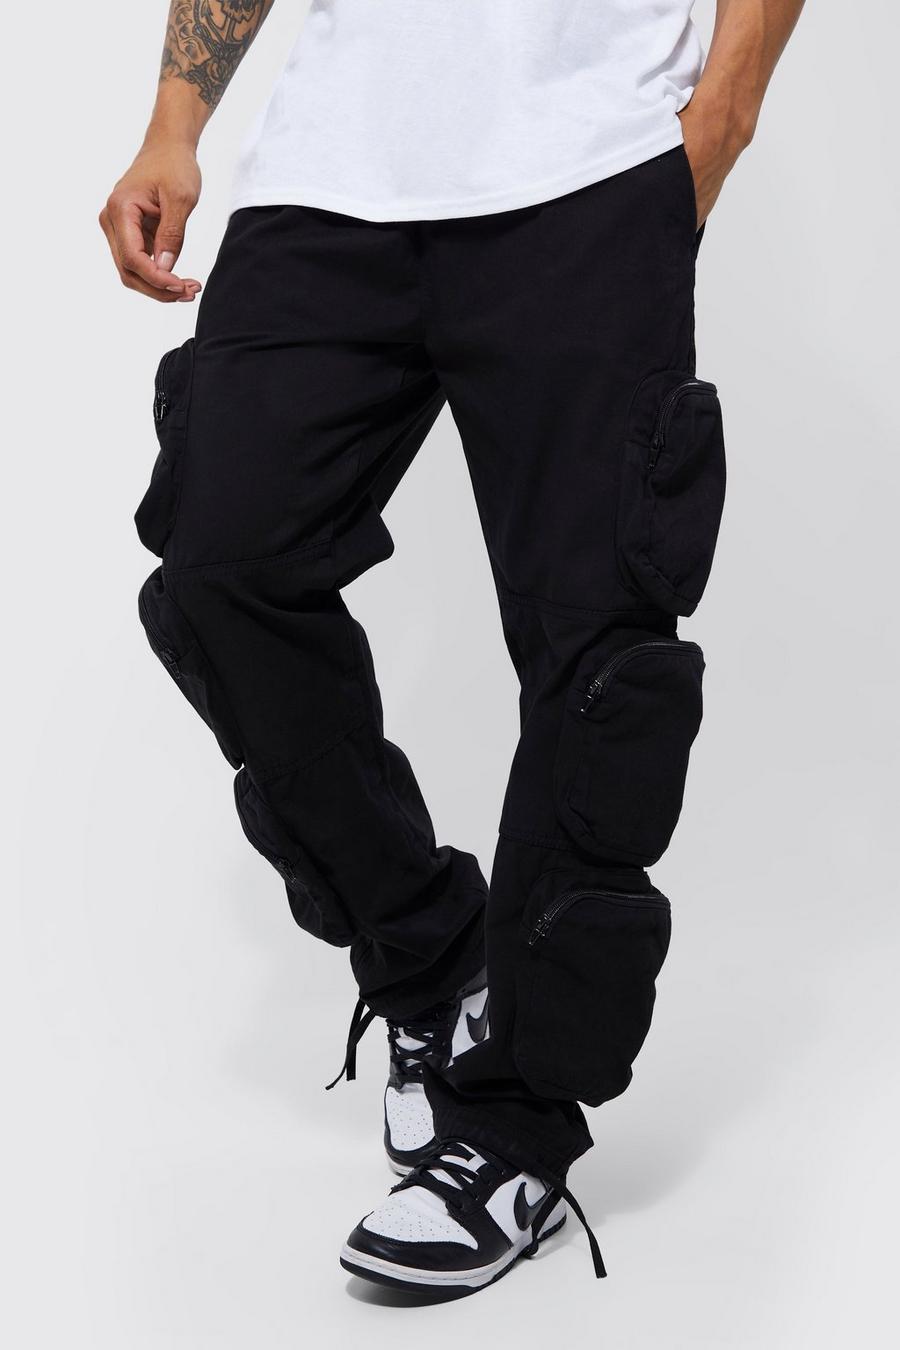 6 pockets cargo pants for men high quality